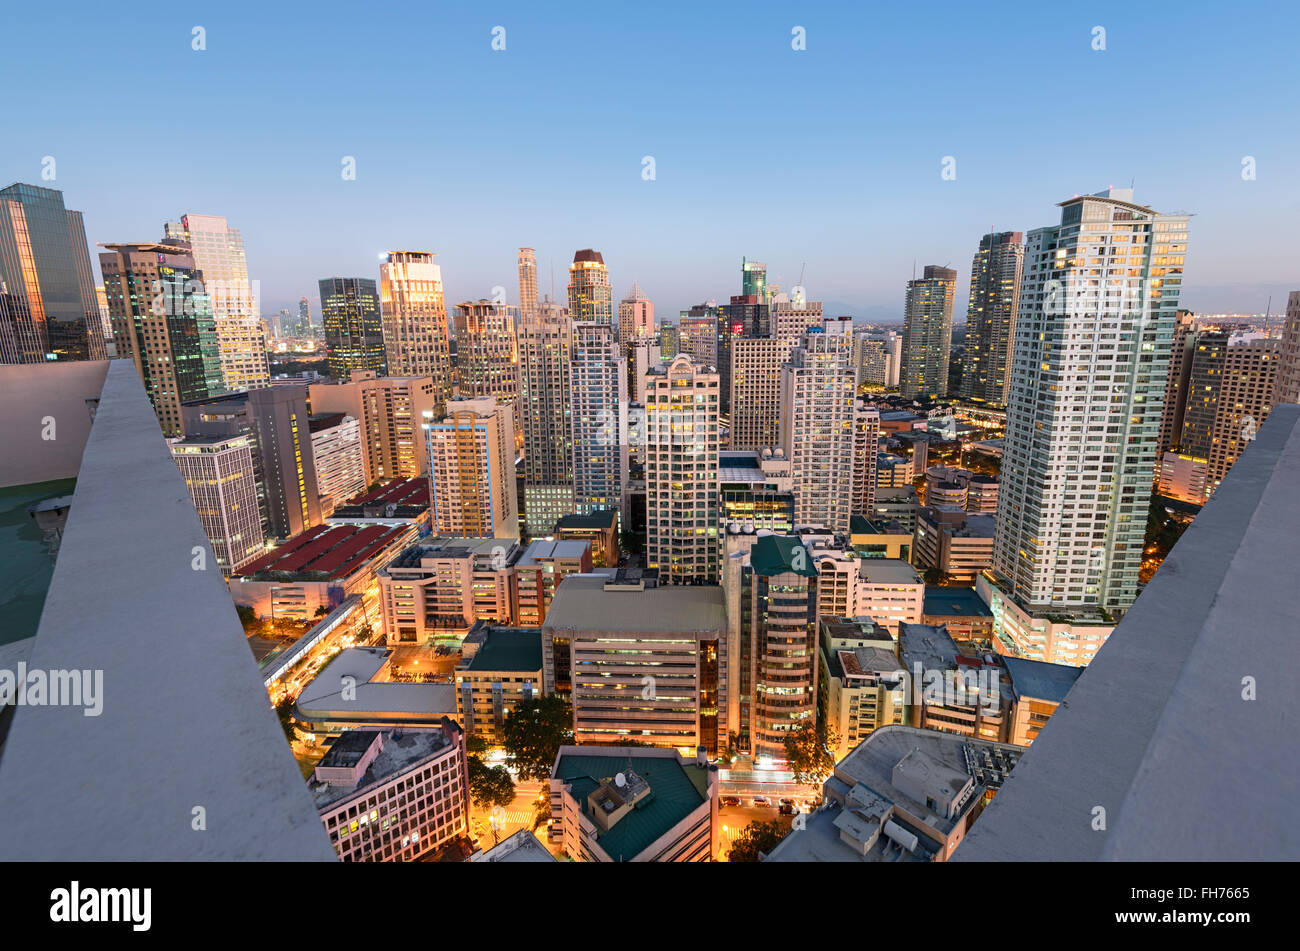 Makati City Skyline. Makati City is one of the most developed business district of Metro Manila and the entire Philippines. Stock Photo